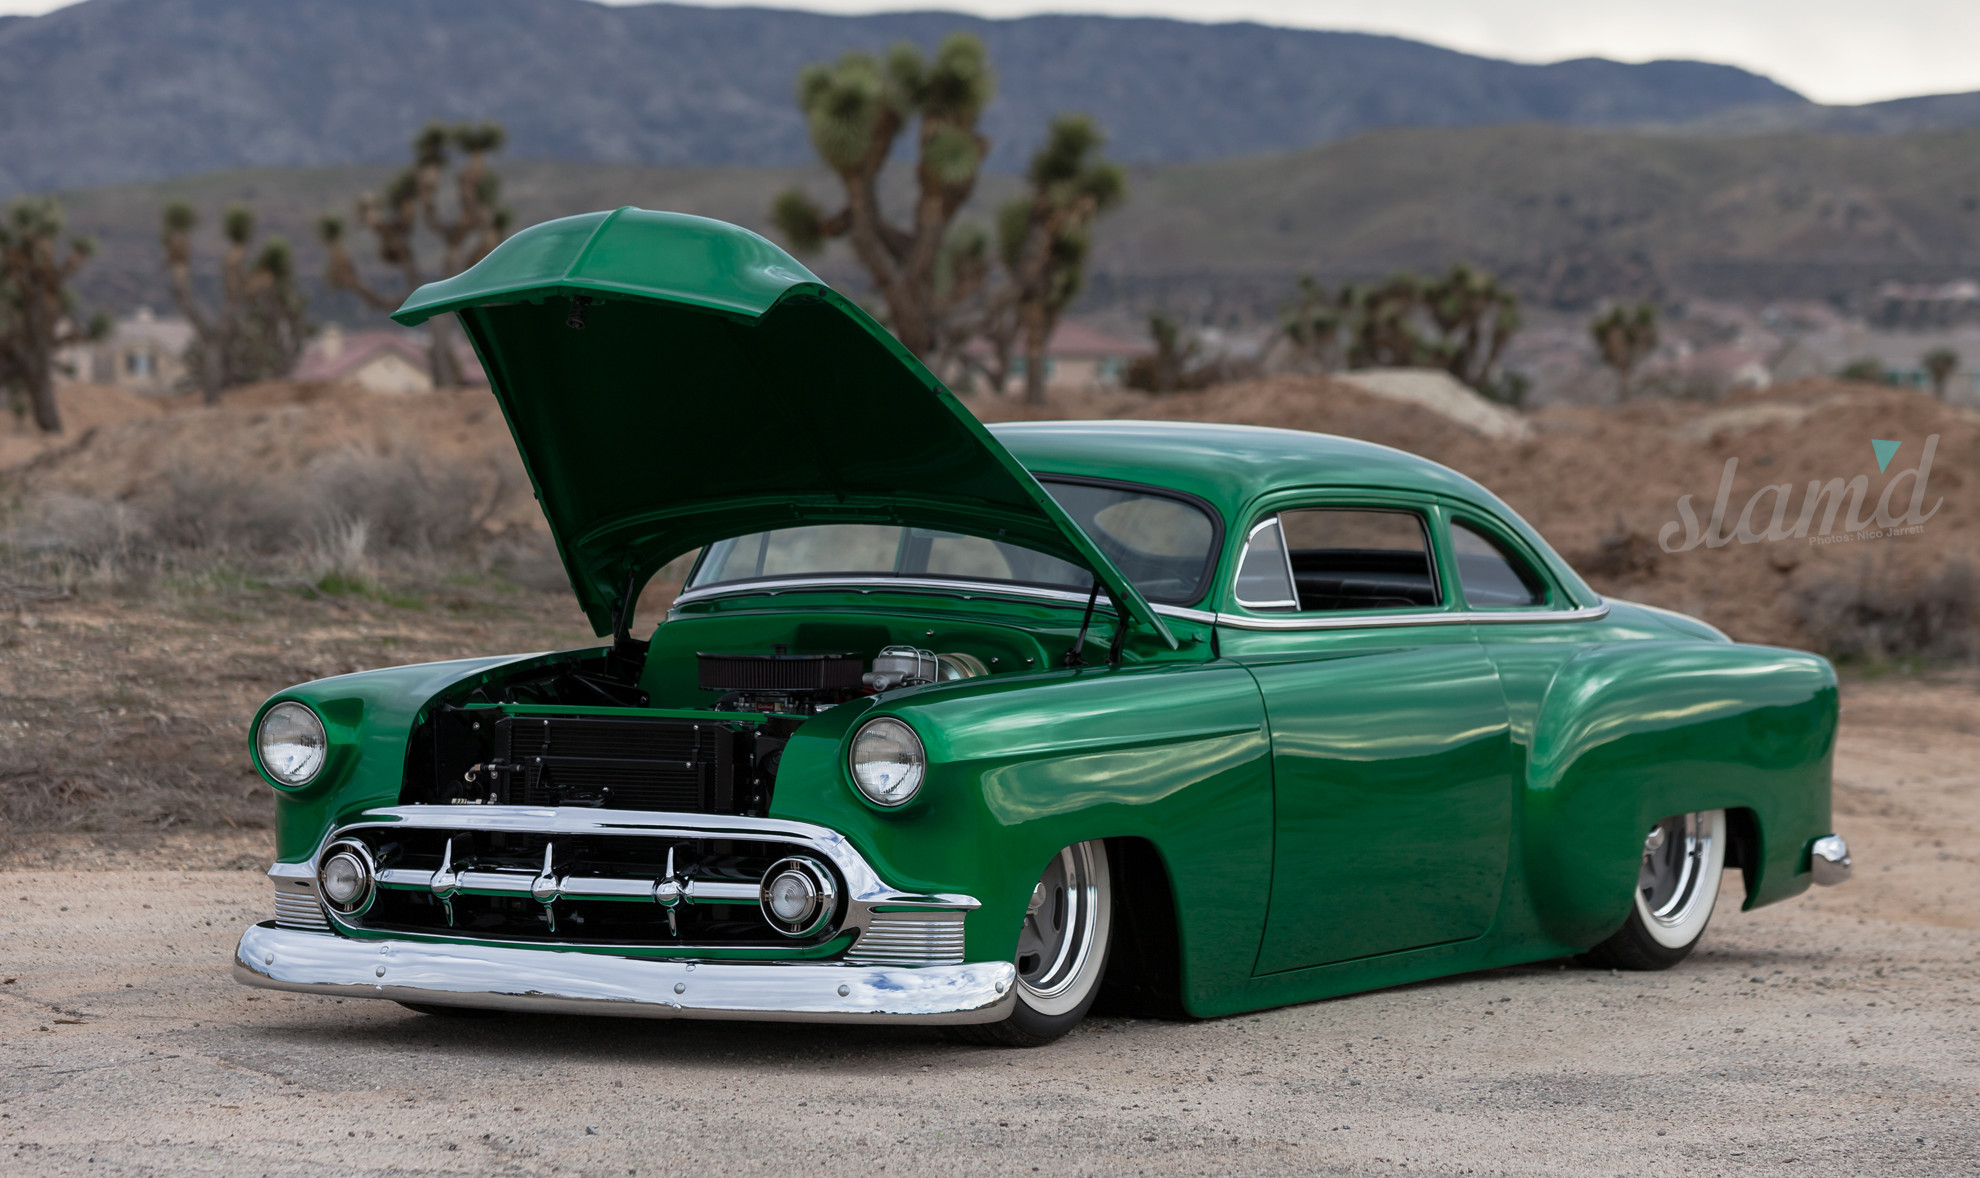 The Green Mile: Toneman’s 1953 Chevy Coupe – Slam'd Mag